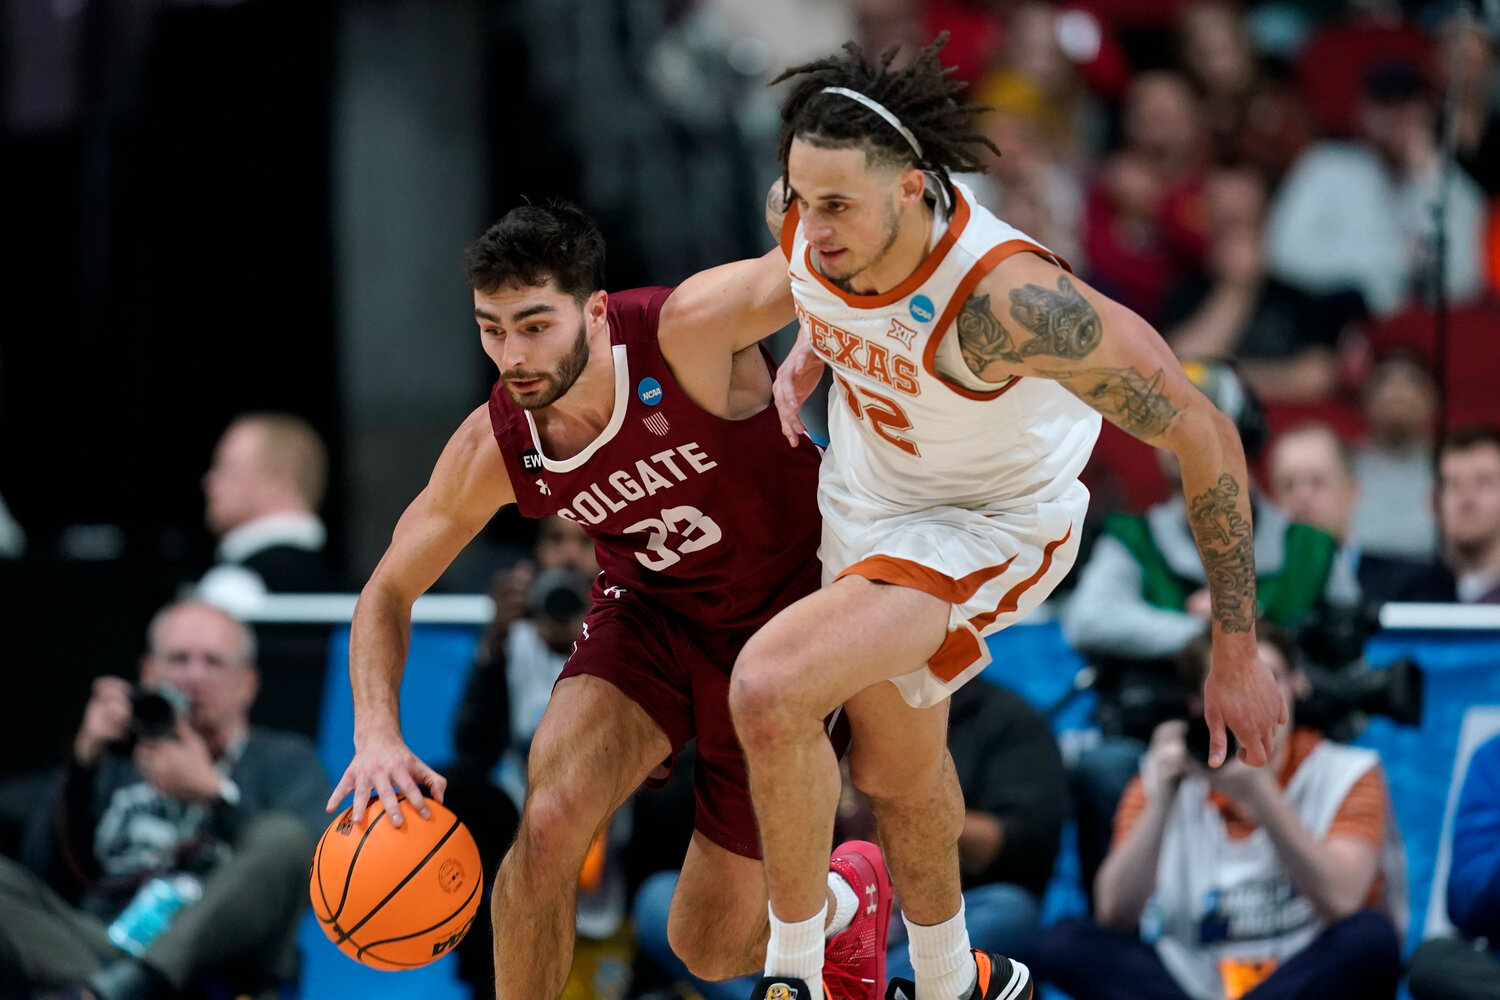 Colgate guard Oliver Lynch-Daniels (33) drives up court past Texas forward Christian Bishop (32) in the first half of a first-round NCAA Tournament game against Texas on Thursday night in Des Moines, Iowa.